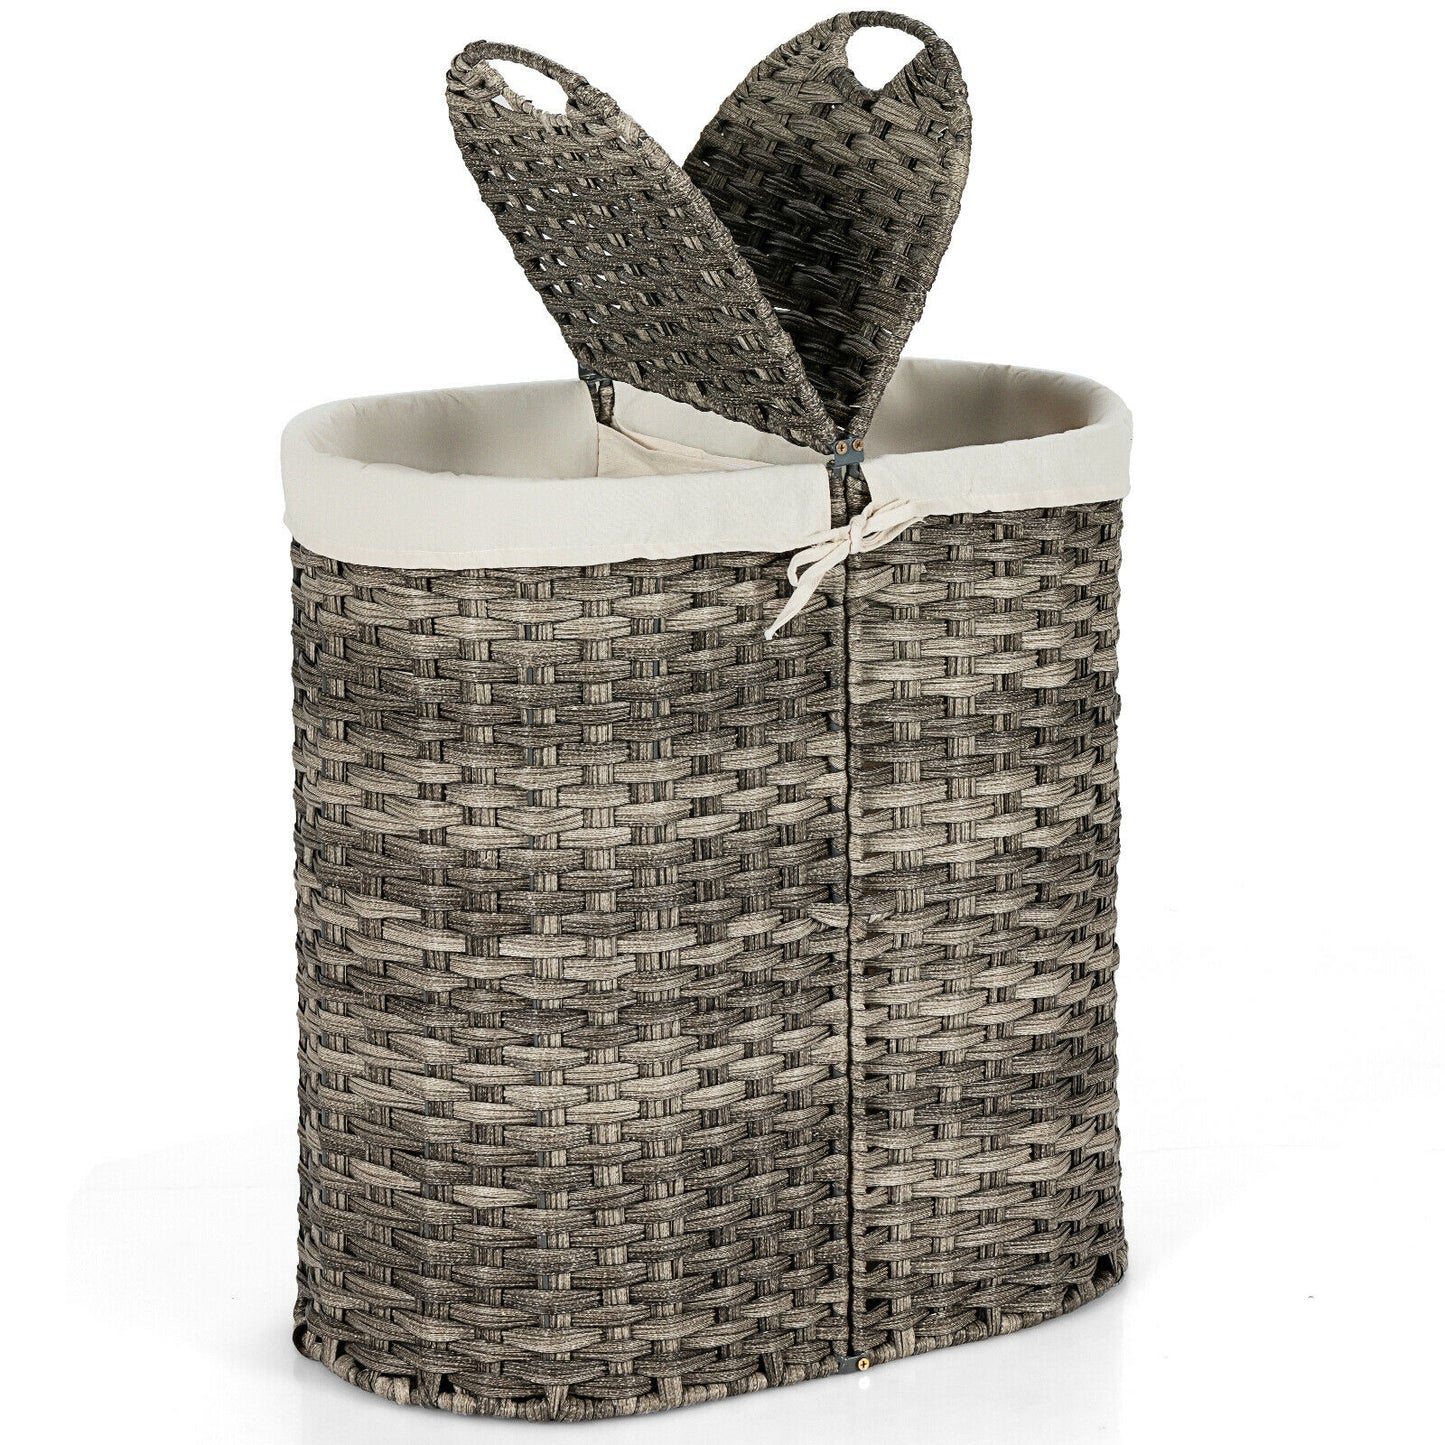 Handwoven Laundry Hamper Basket with 2 Removable Liner Bags-Gray